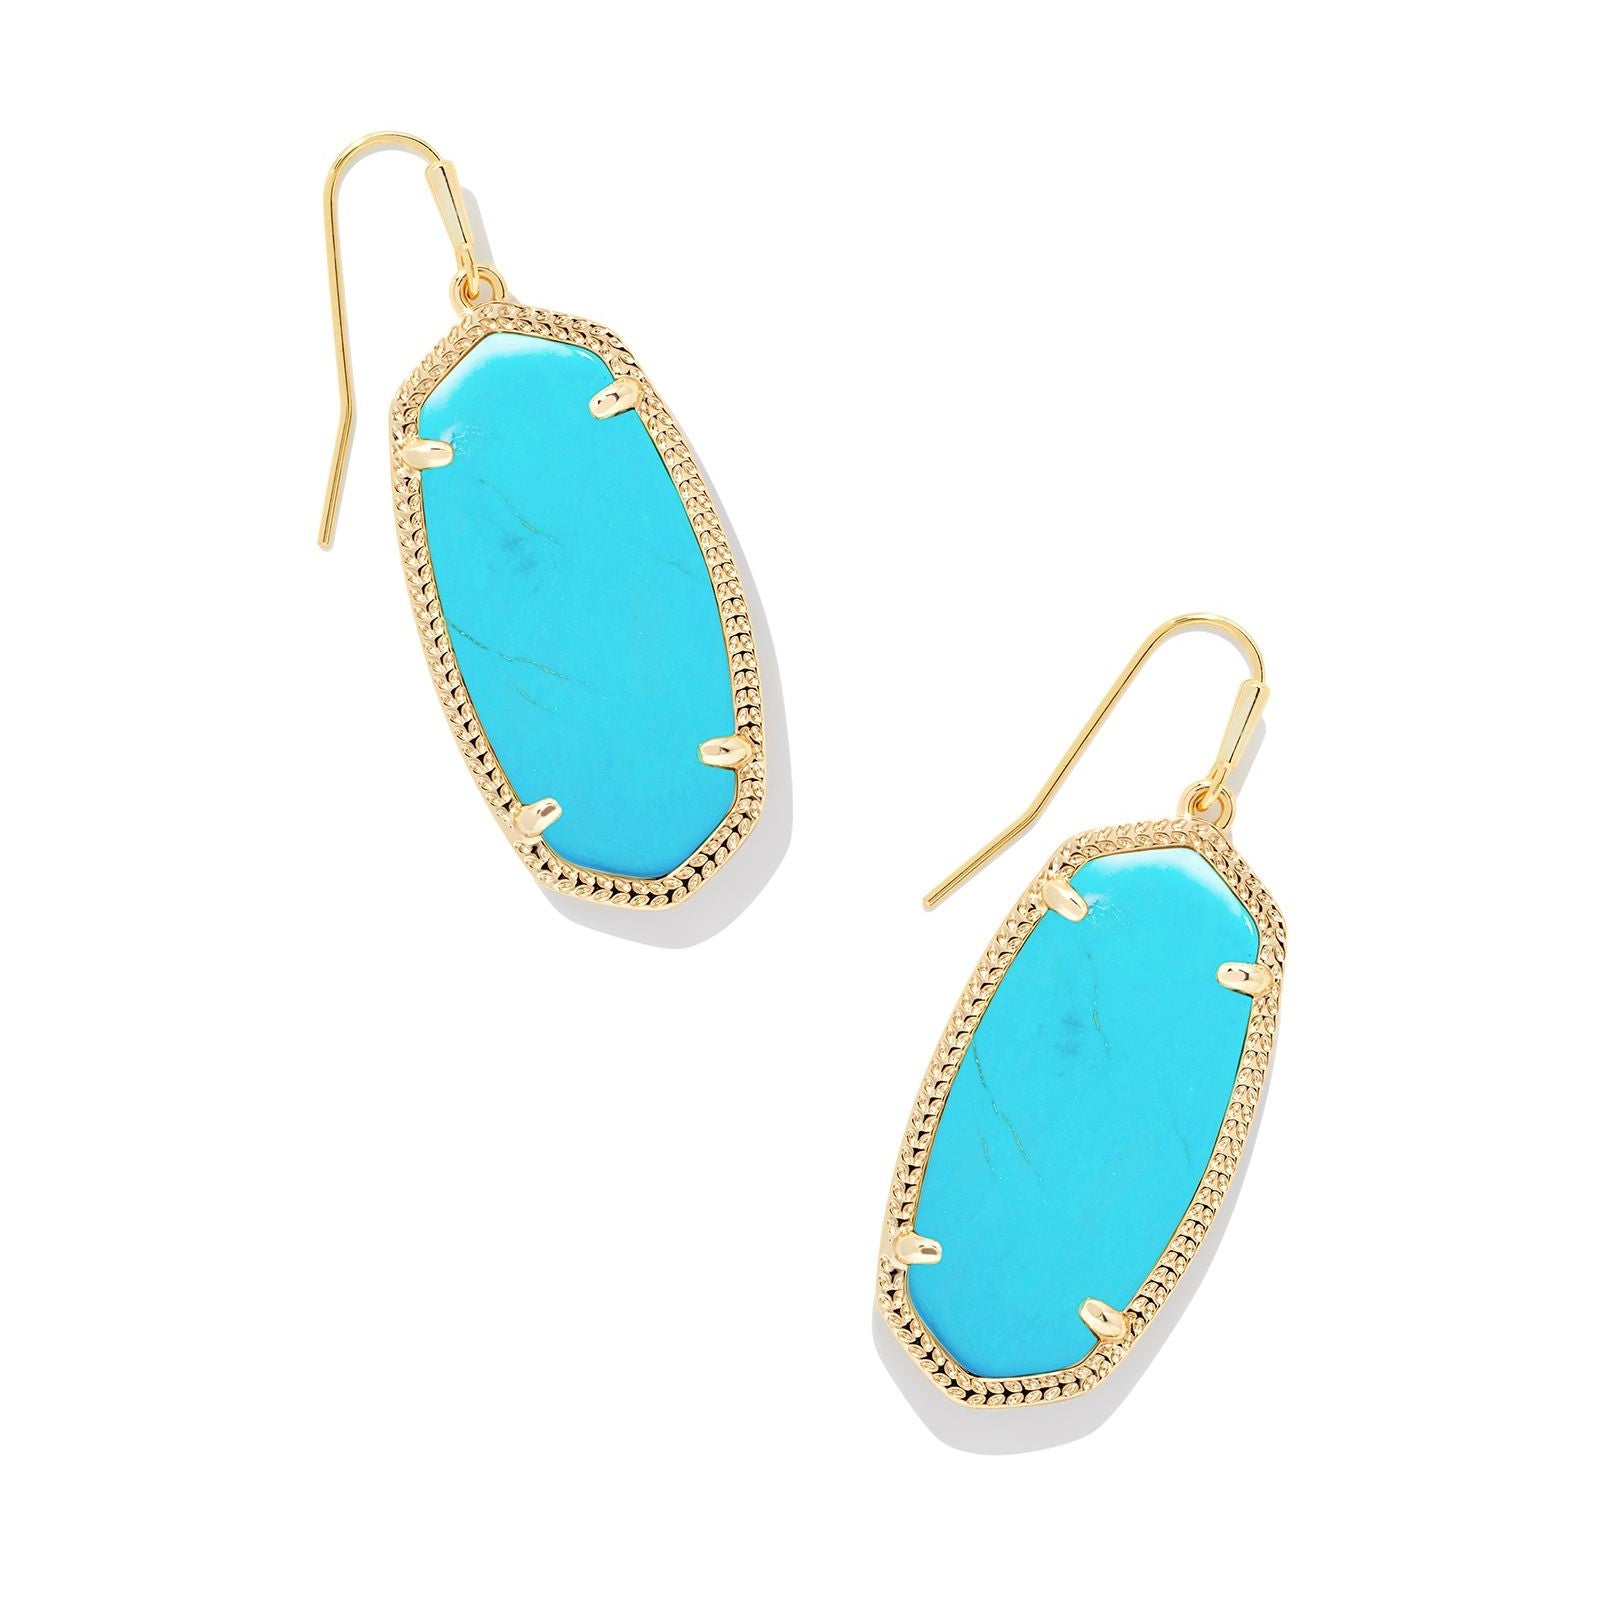 Kendra Scott | Elle Gold Drop Earrings in Variegated Turquoise Magnesite - Giddy Up Glamour Boutique